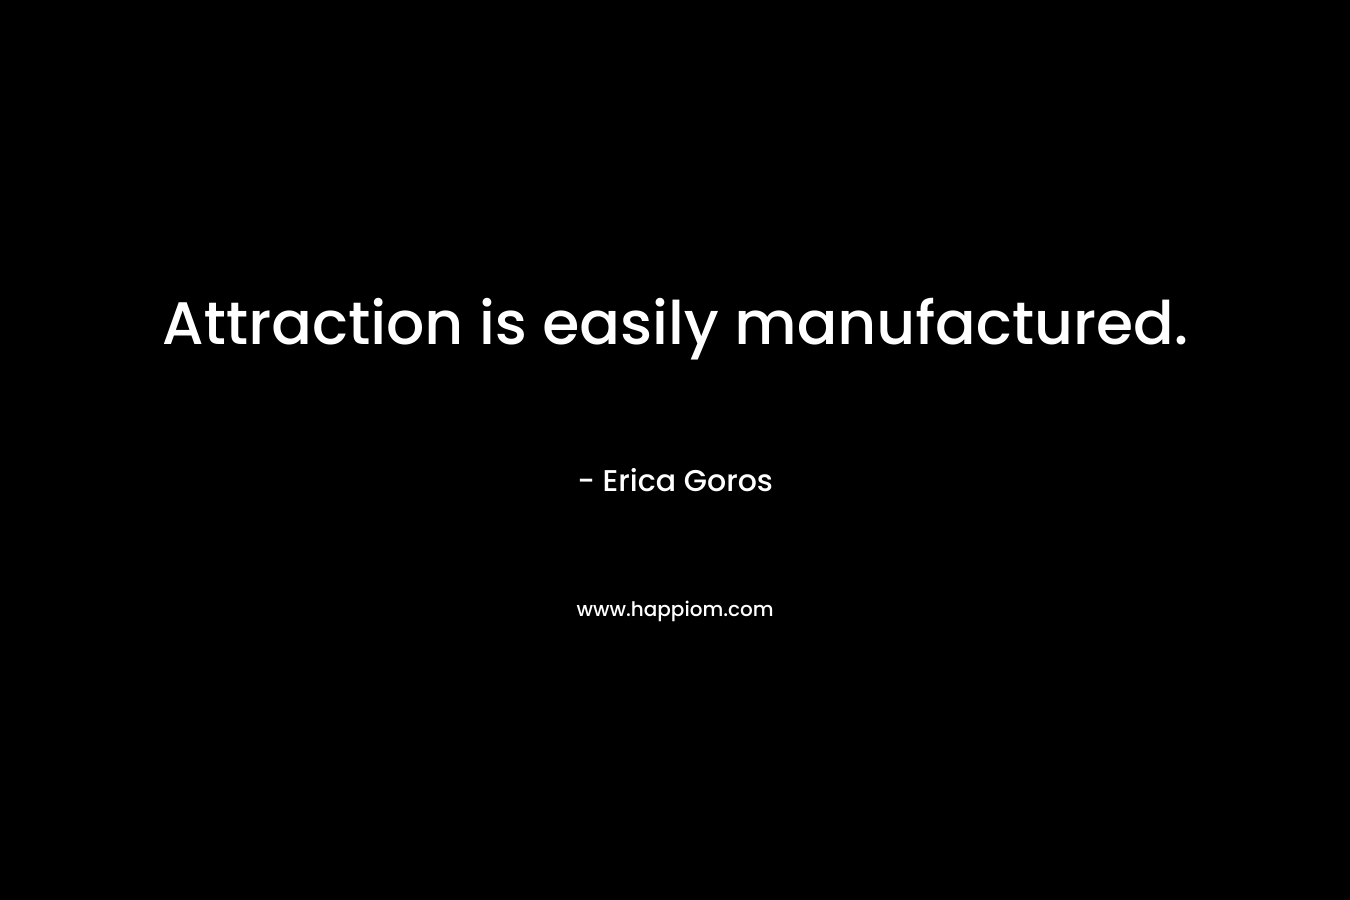 Attraction is easily manufactured. – Erica Goros